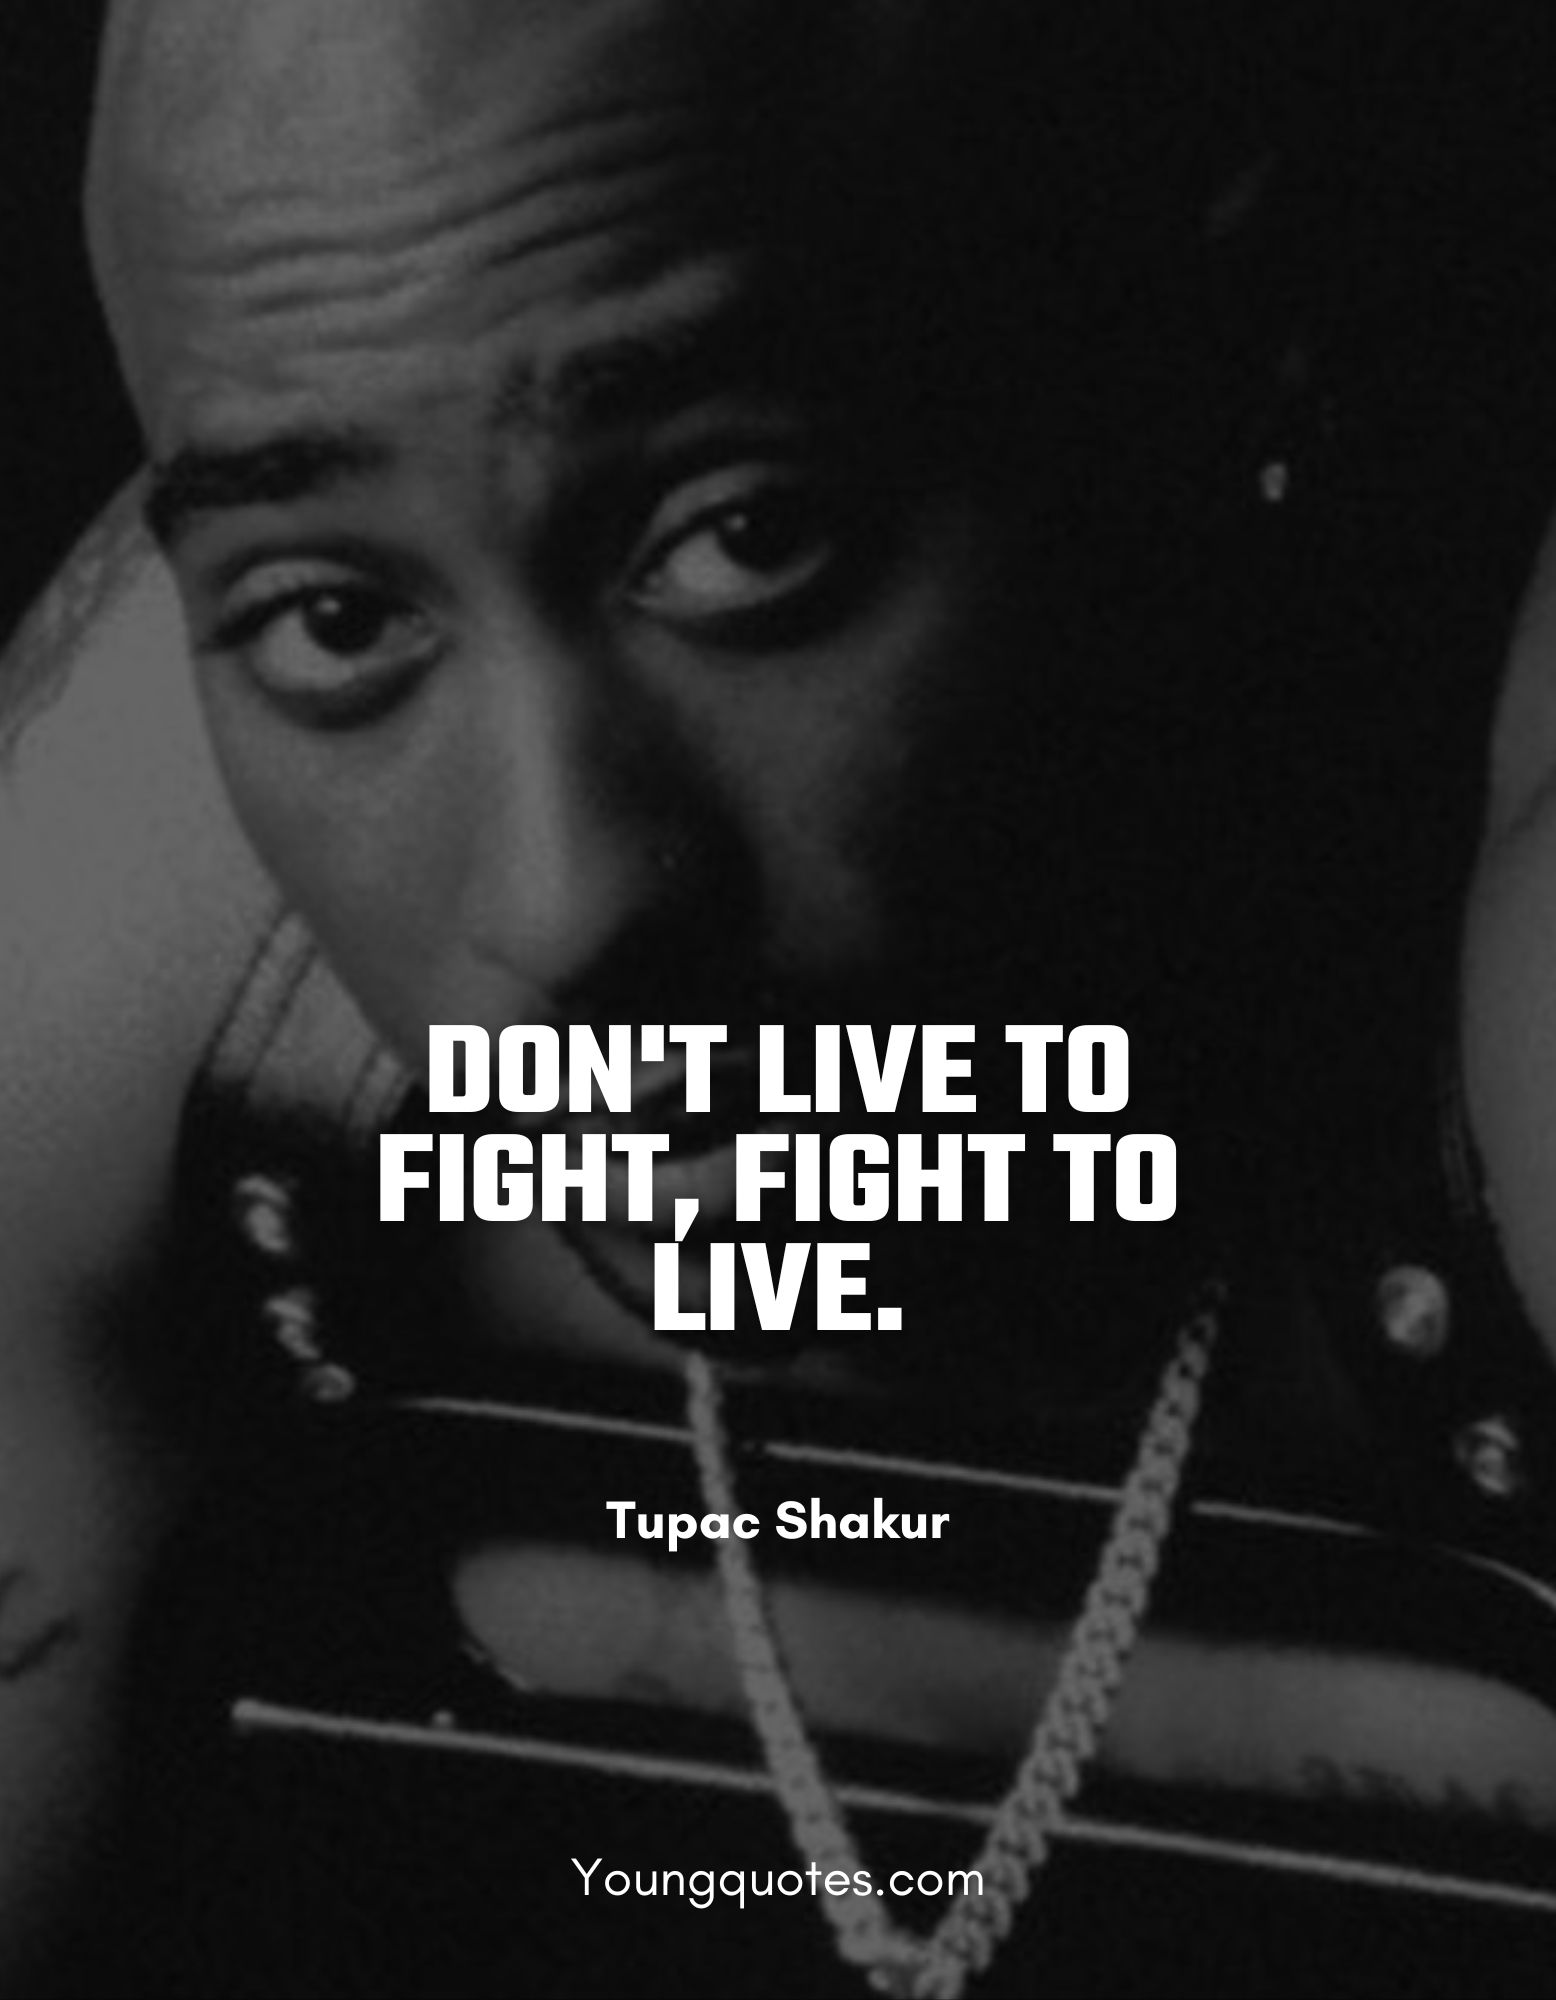 Don't live to fight, fight to live.